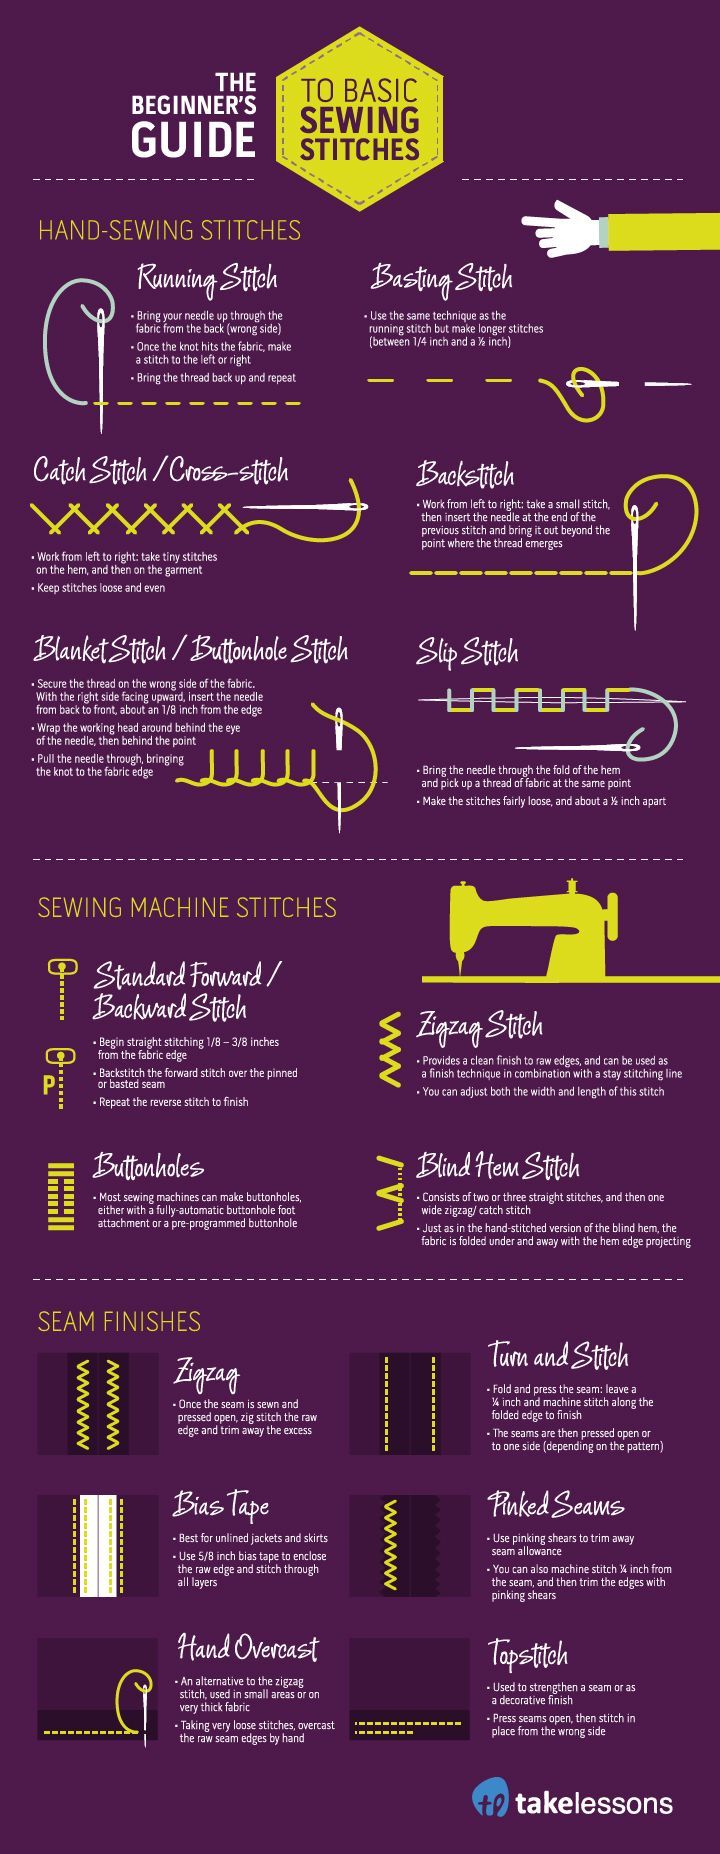 SIY (Sew-it-yourself): Everything You Need to Know about Basic Sewing Stitches – T